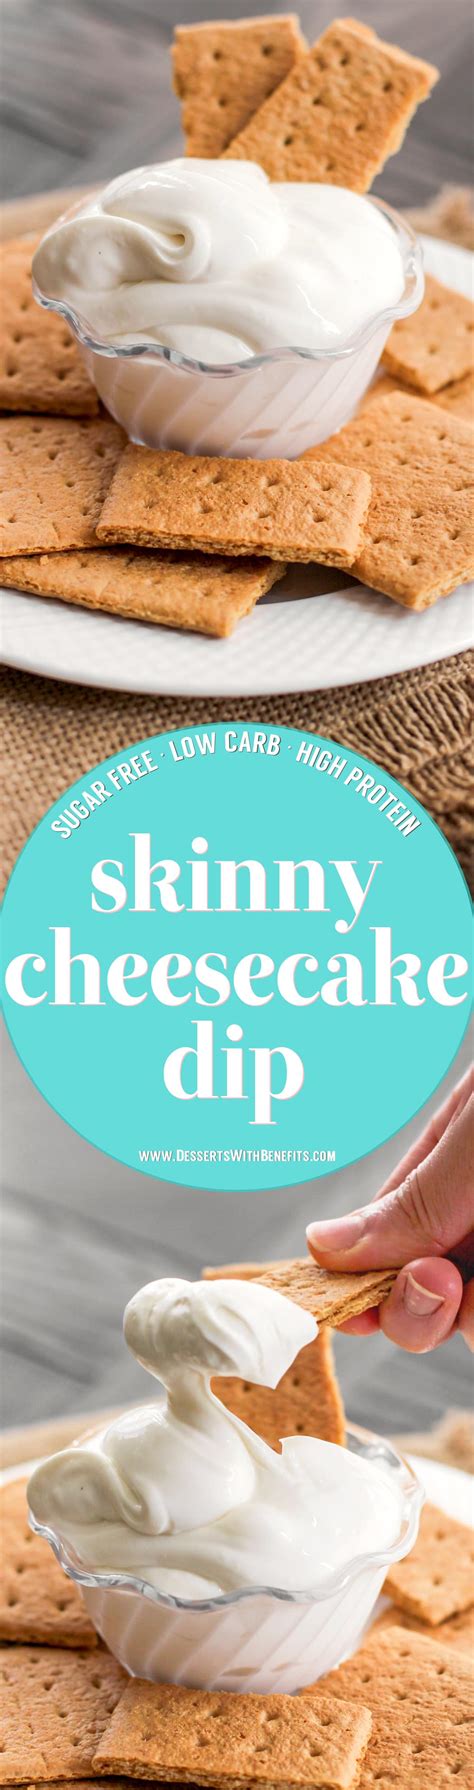 Here are 25+ ways to eat low carb desserts without ruining your keto diet. Healthy Cheesecake Dip (sugar free, low carb, low fat ...